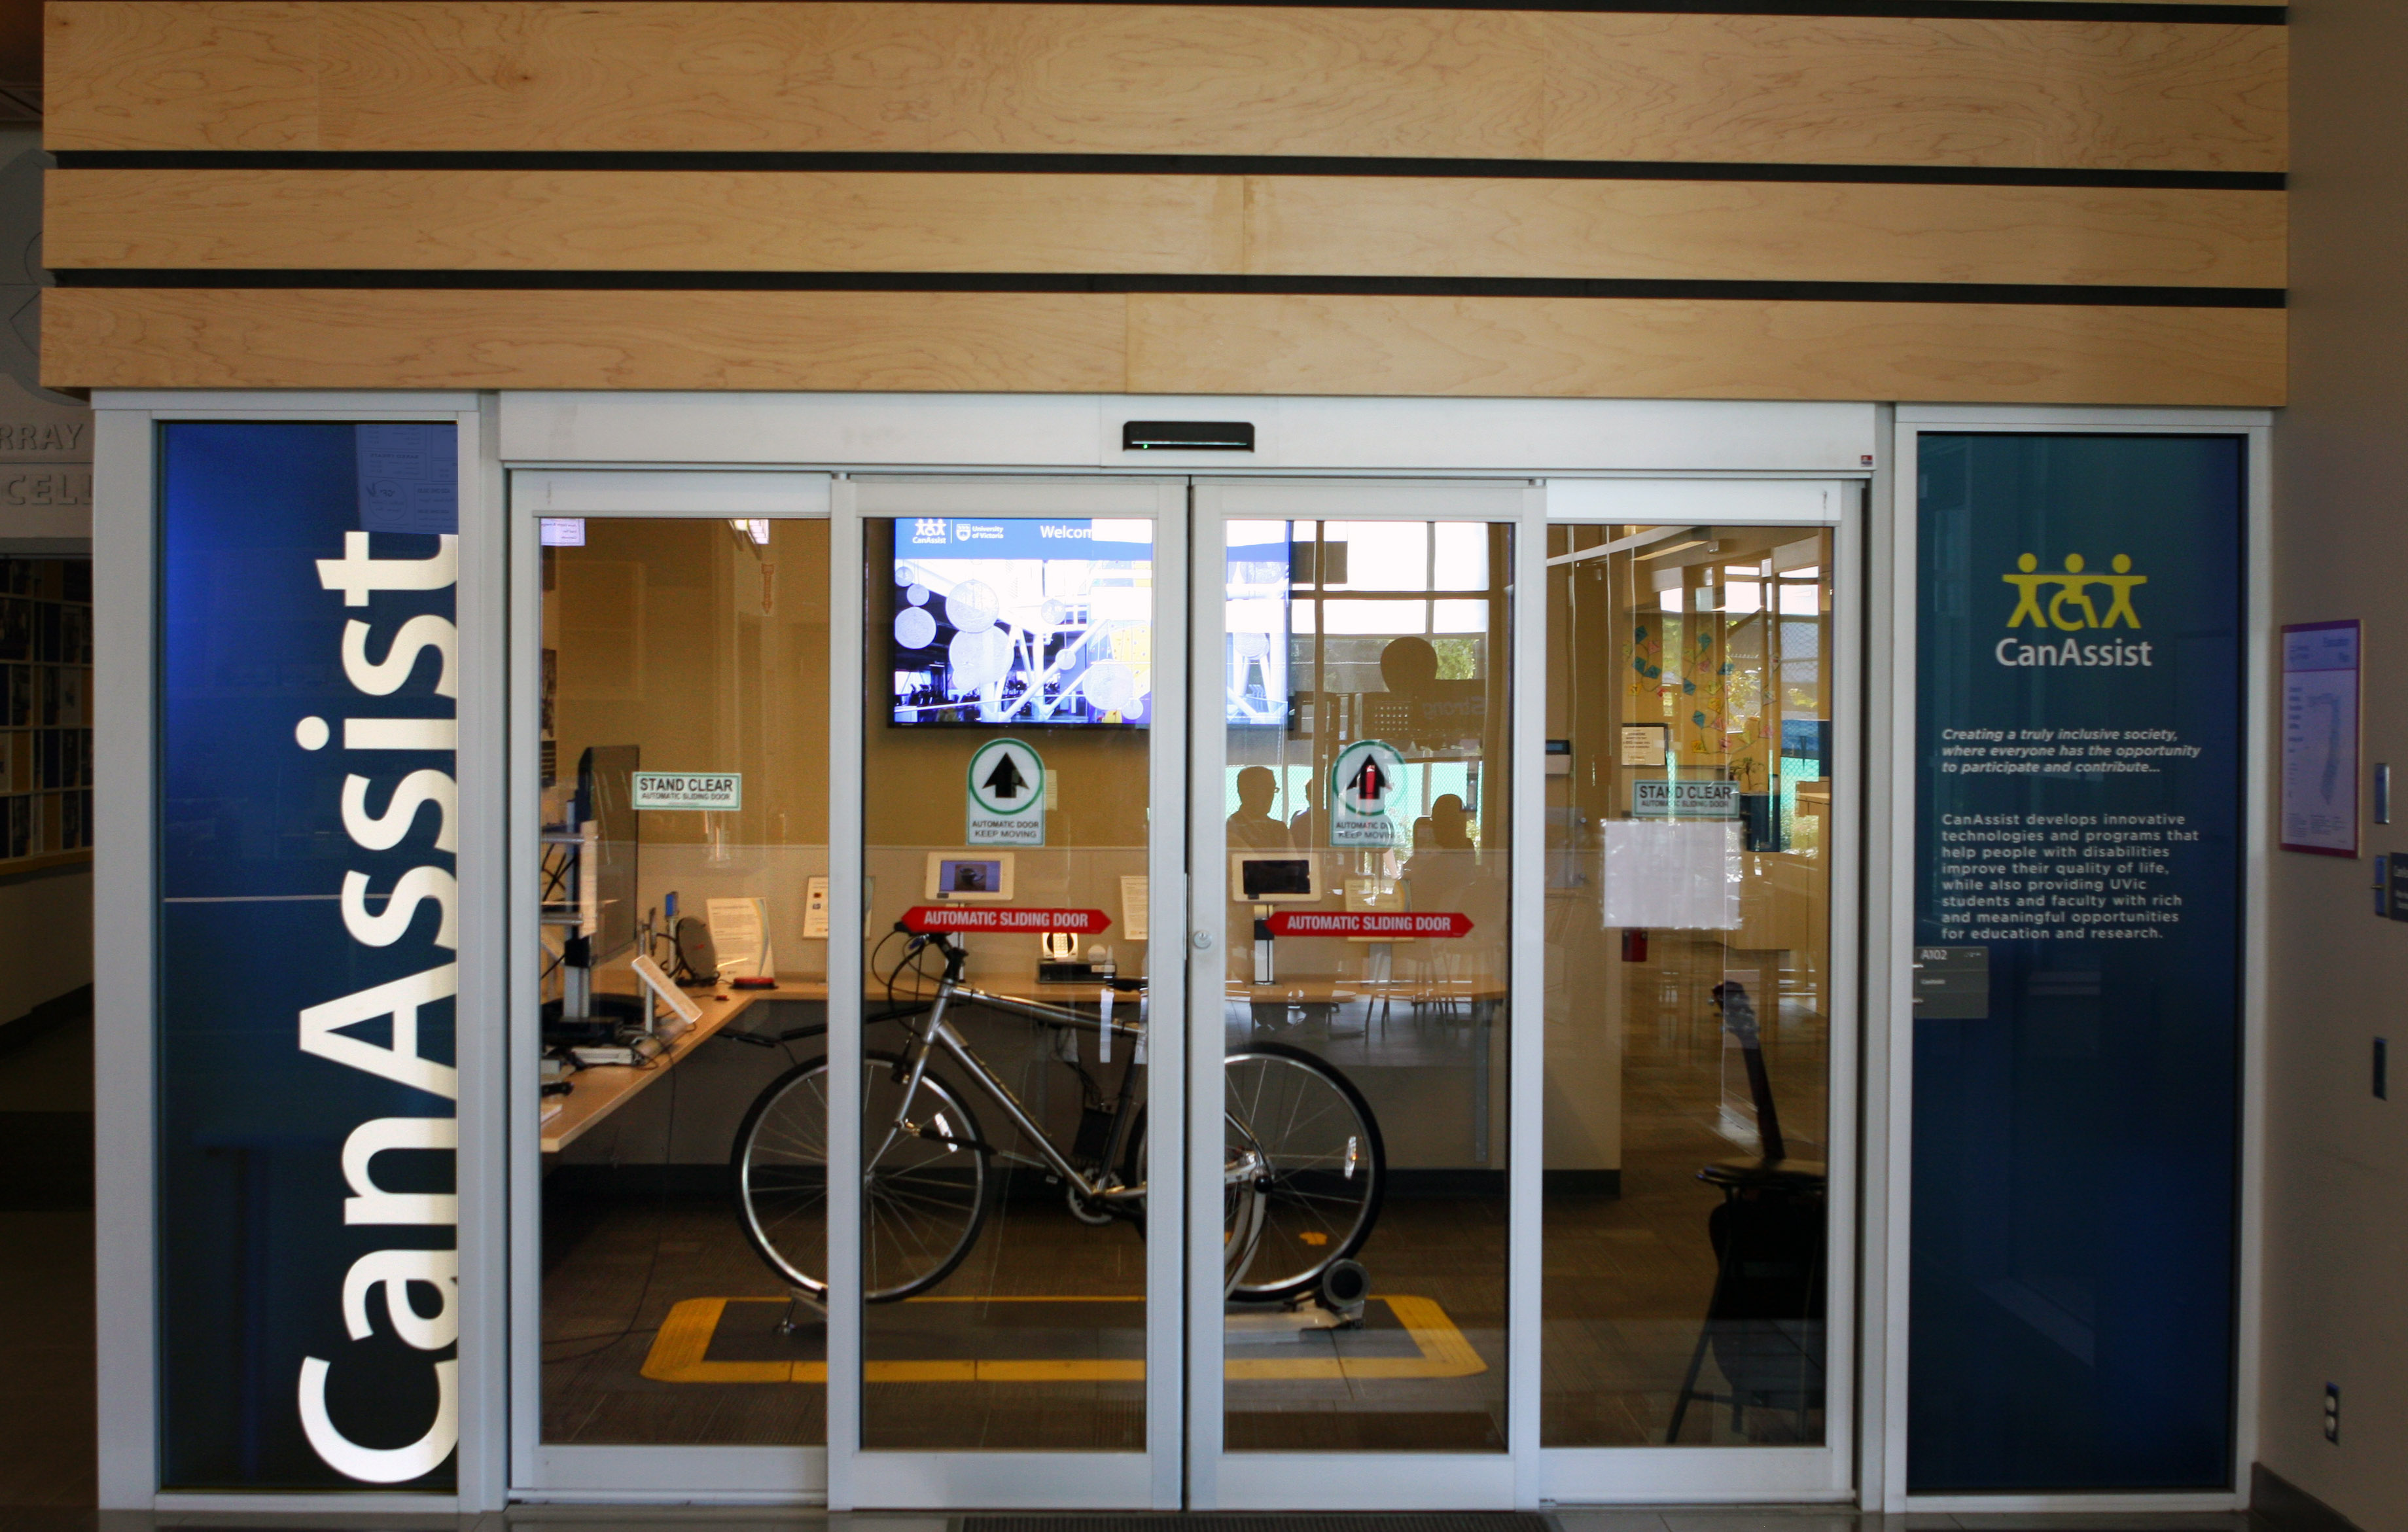 CanAssist's front entrance within the CARSA building